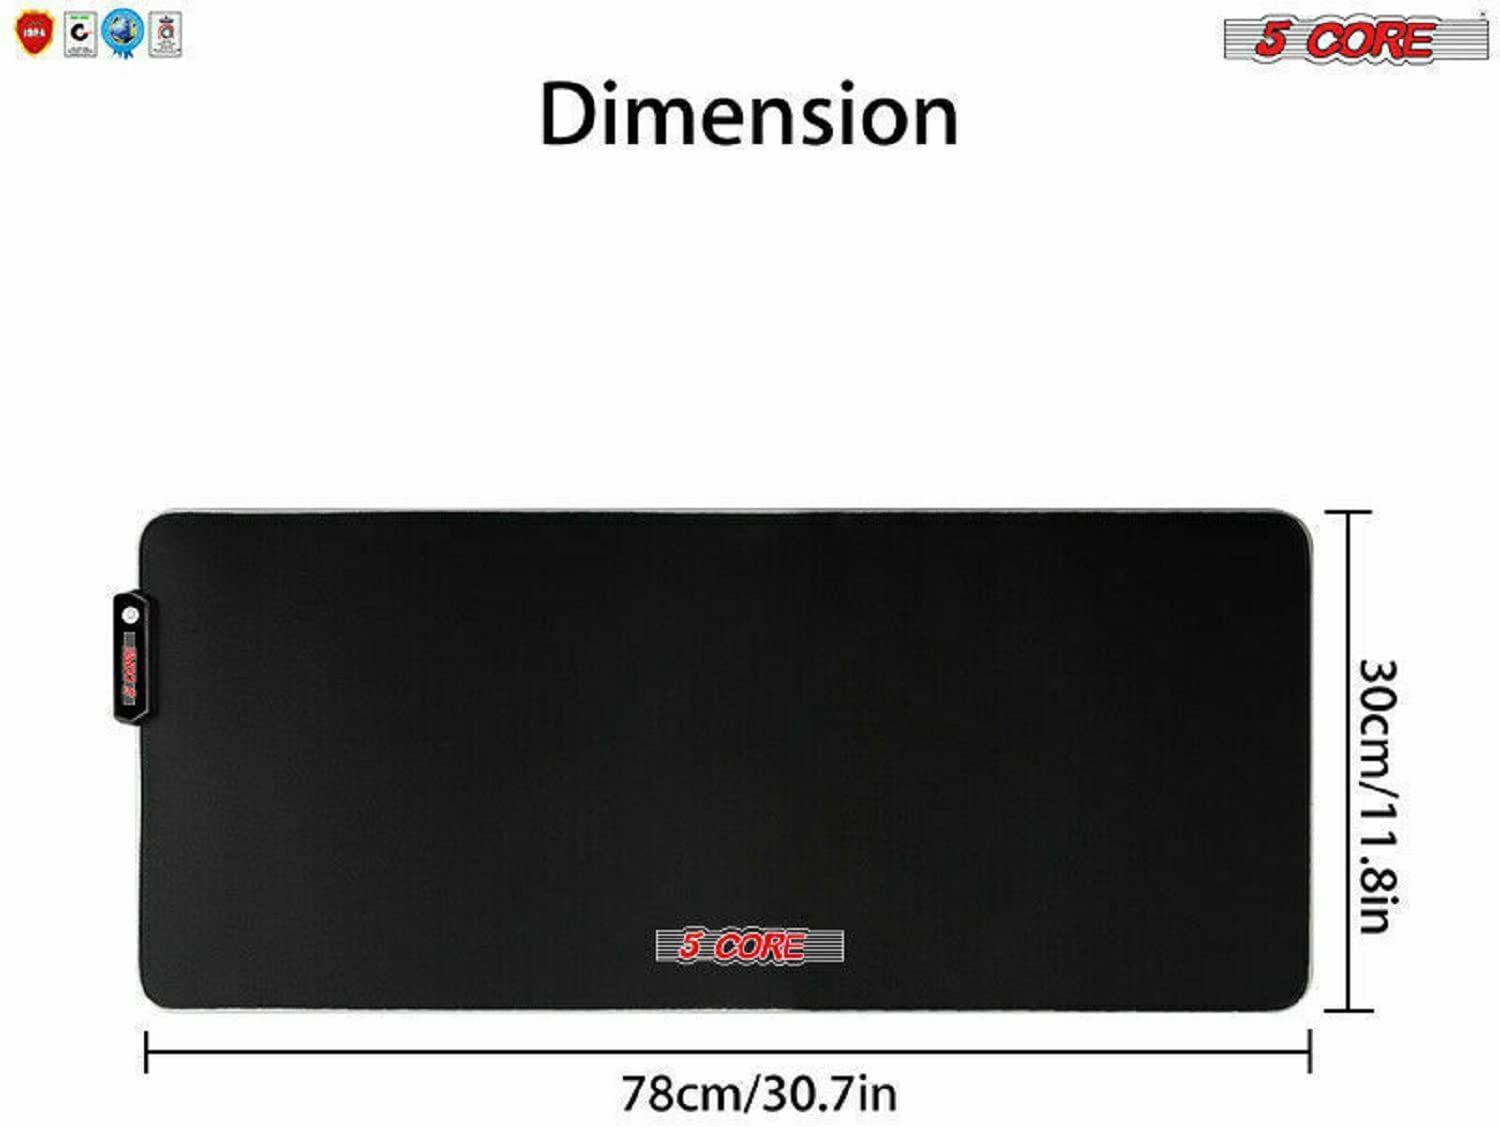 5 Core RGB Mouse Pad • 12 Light Modes High-Performance Soft Padded